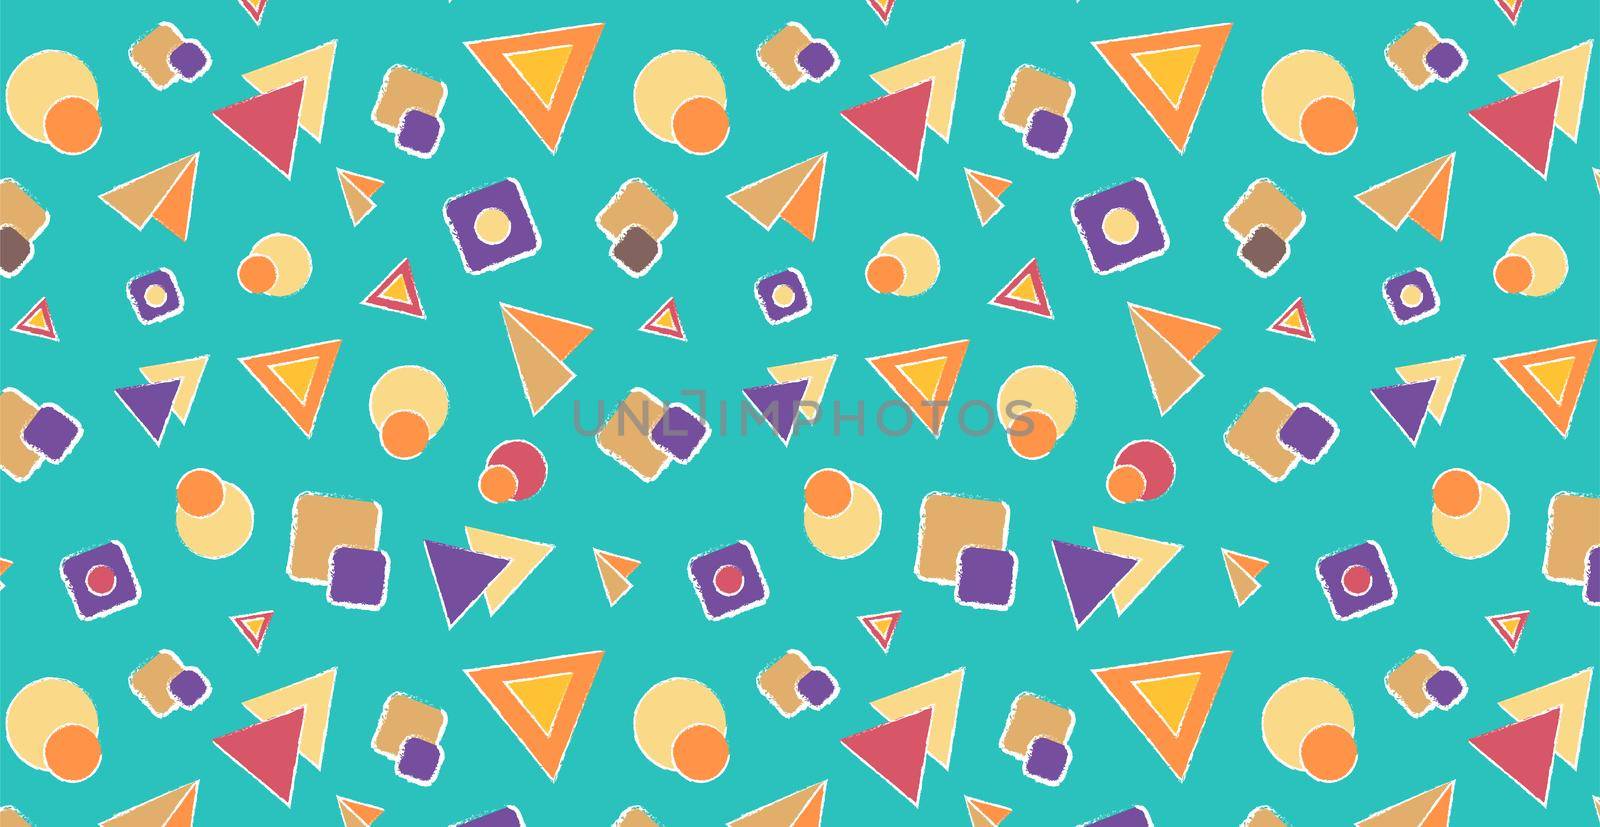 Abstract geometric pattern for children's themes. Bright multi-colored geometric shapes. Ideal for baby wallpapers, wrapping paper, napkins.